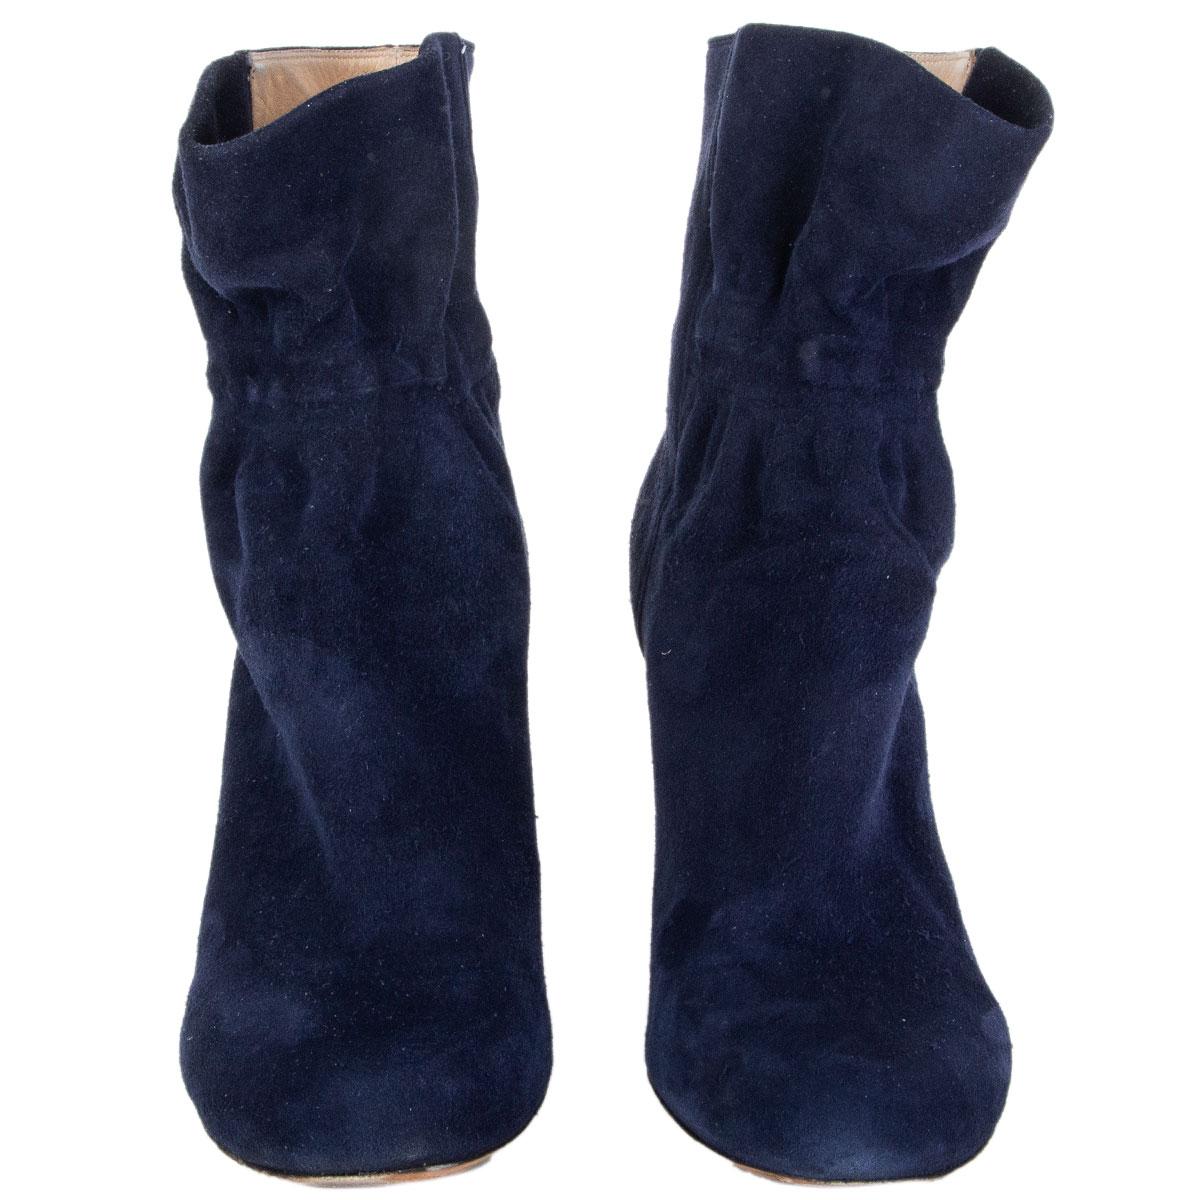 authentic Chloé round-toe ruched ankle boots in midnight blue suede. Have been worn and are in excellent condition. 

Imprinted Size 38
Shoe Size 38
Inside Sole 25cm (9.8in)
Width 7.5cm (2.9in)
Heel 9.5cm (3.7in)